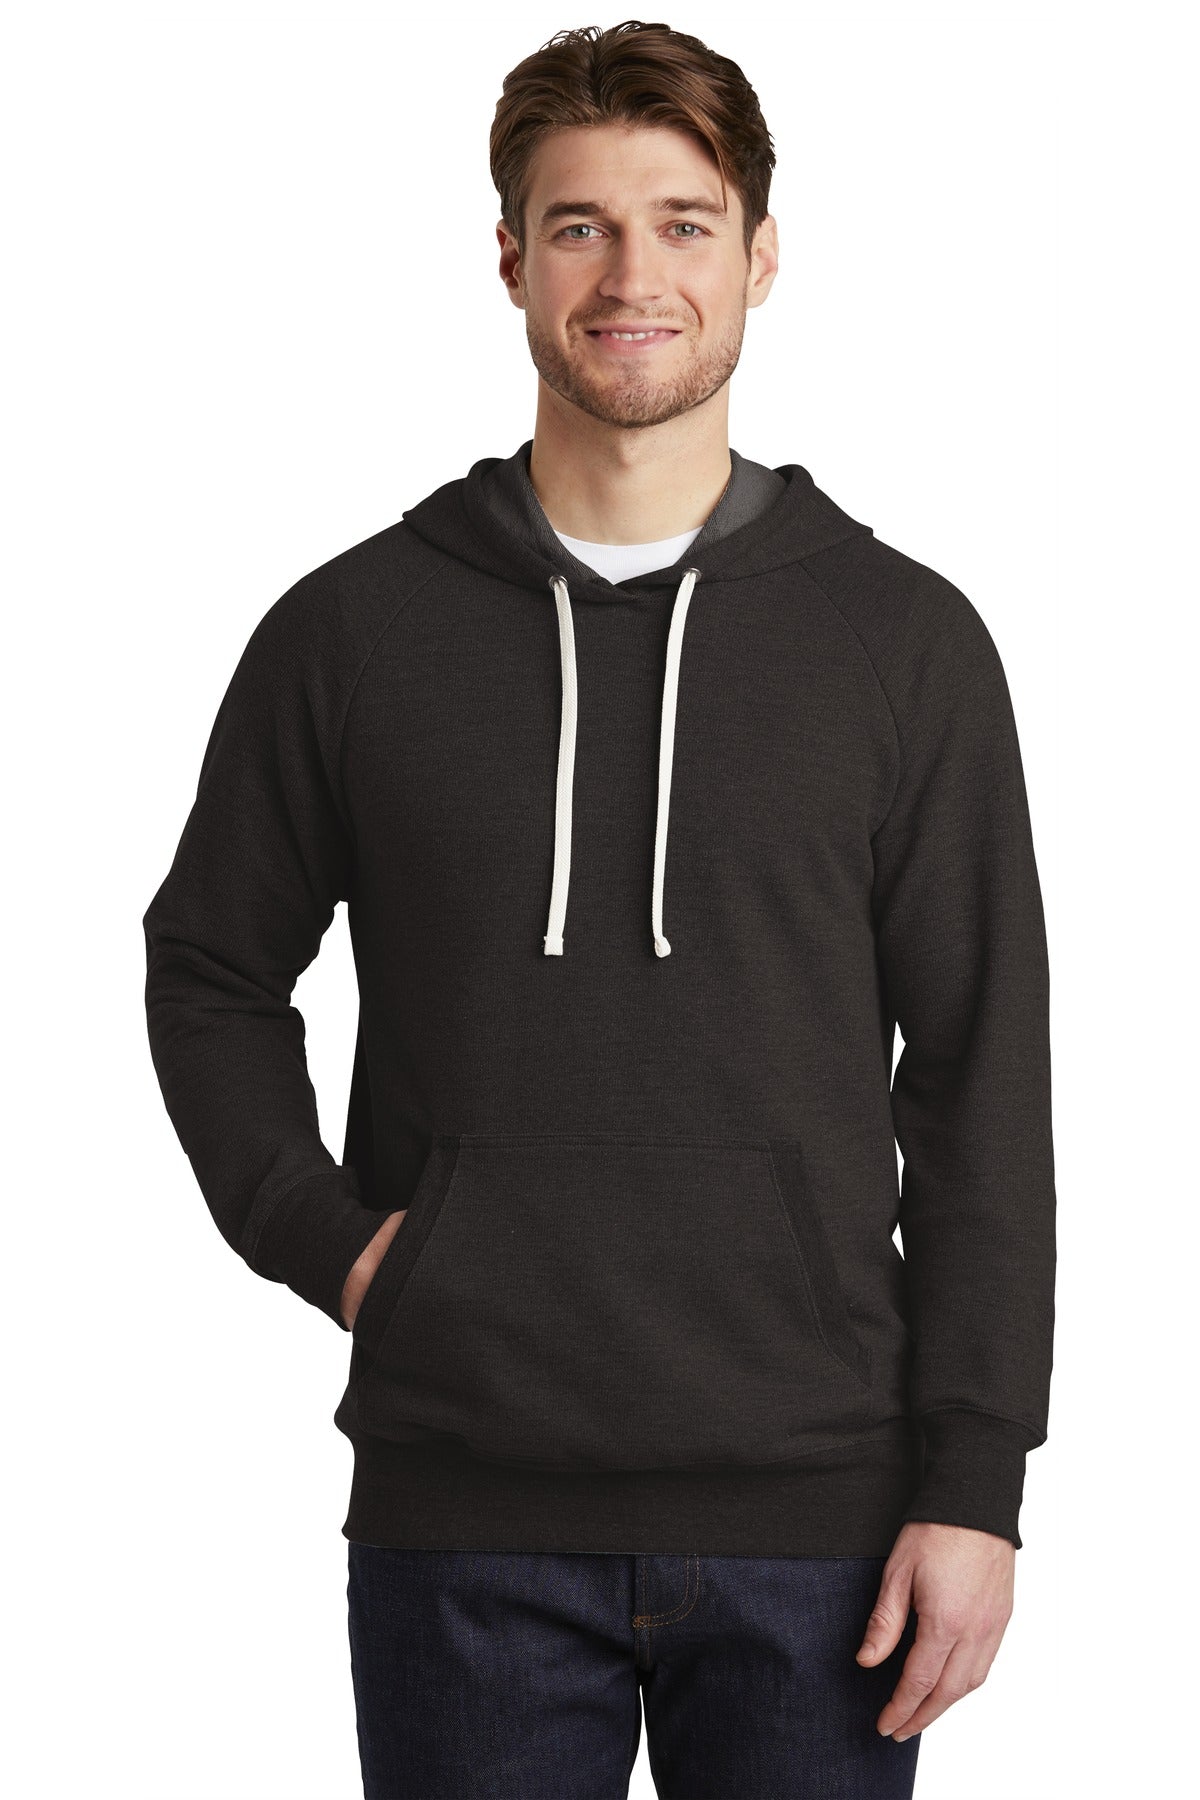 Perfect Tri French Terry Hoodie. DT355